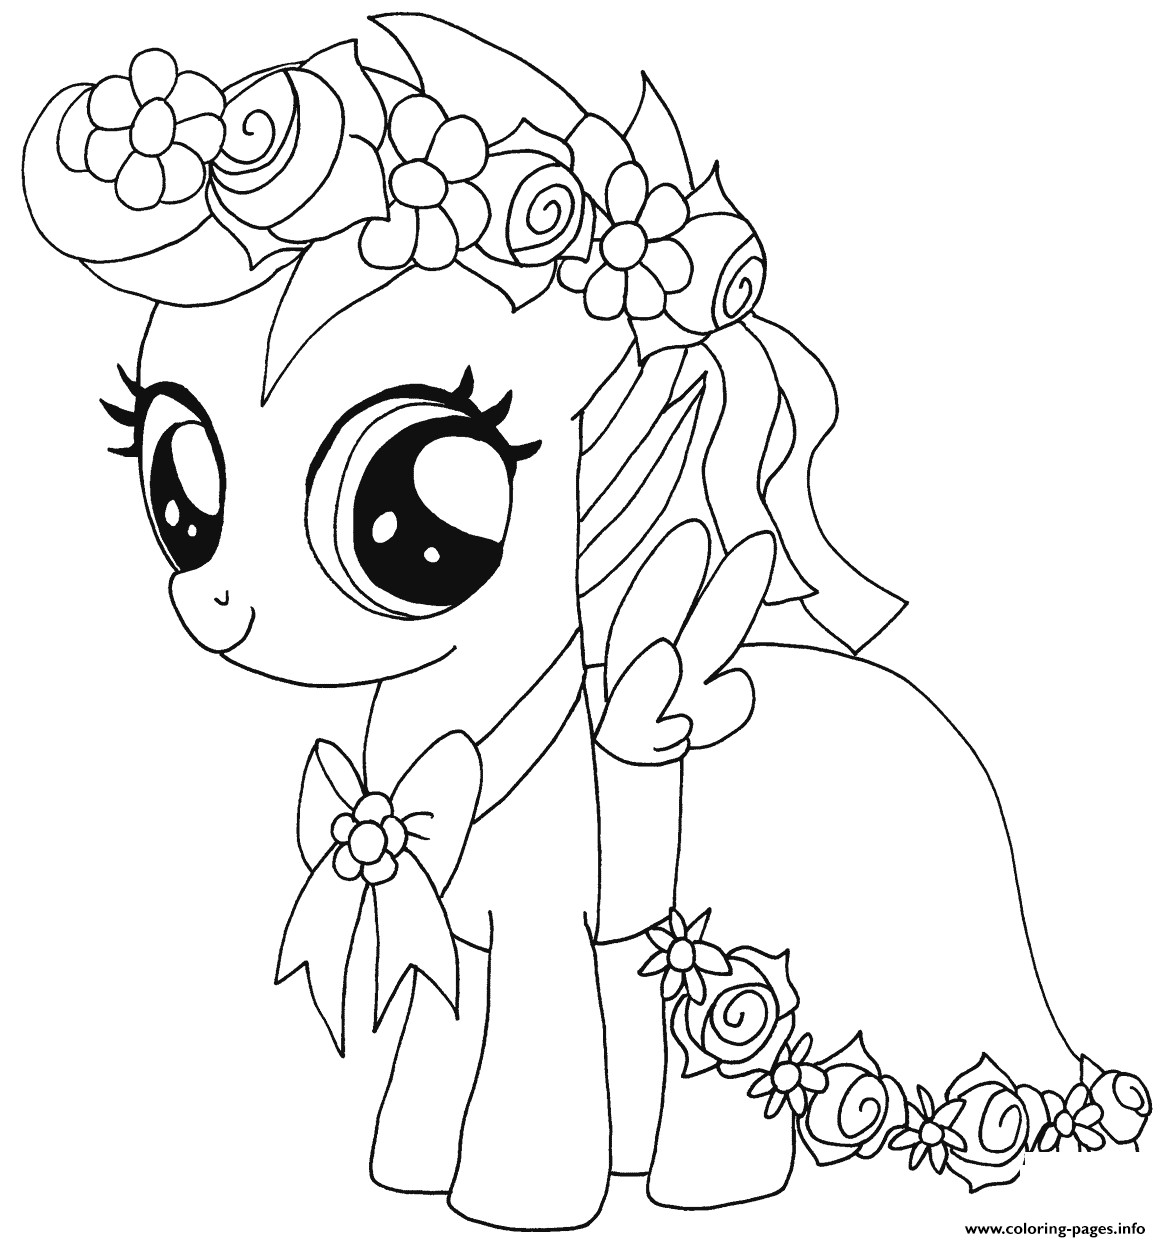 Baby My Little Pony Coloring Pages
 Baby Scootaloo My Little Pony Coloring Pages Printable